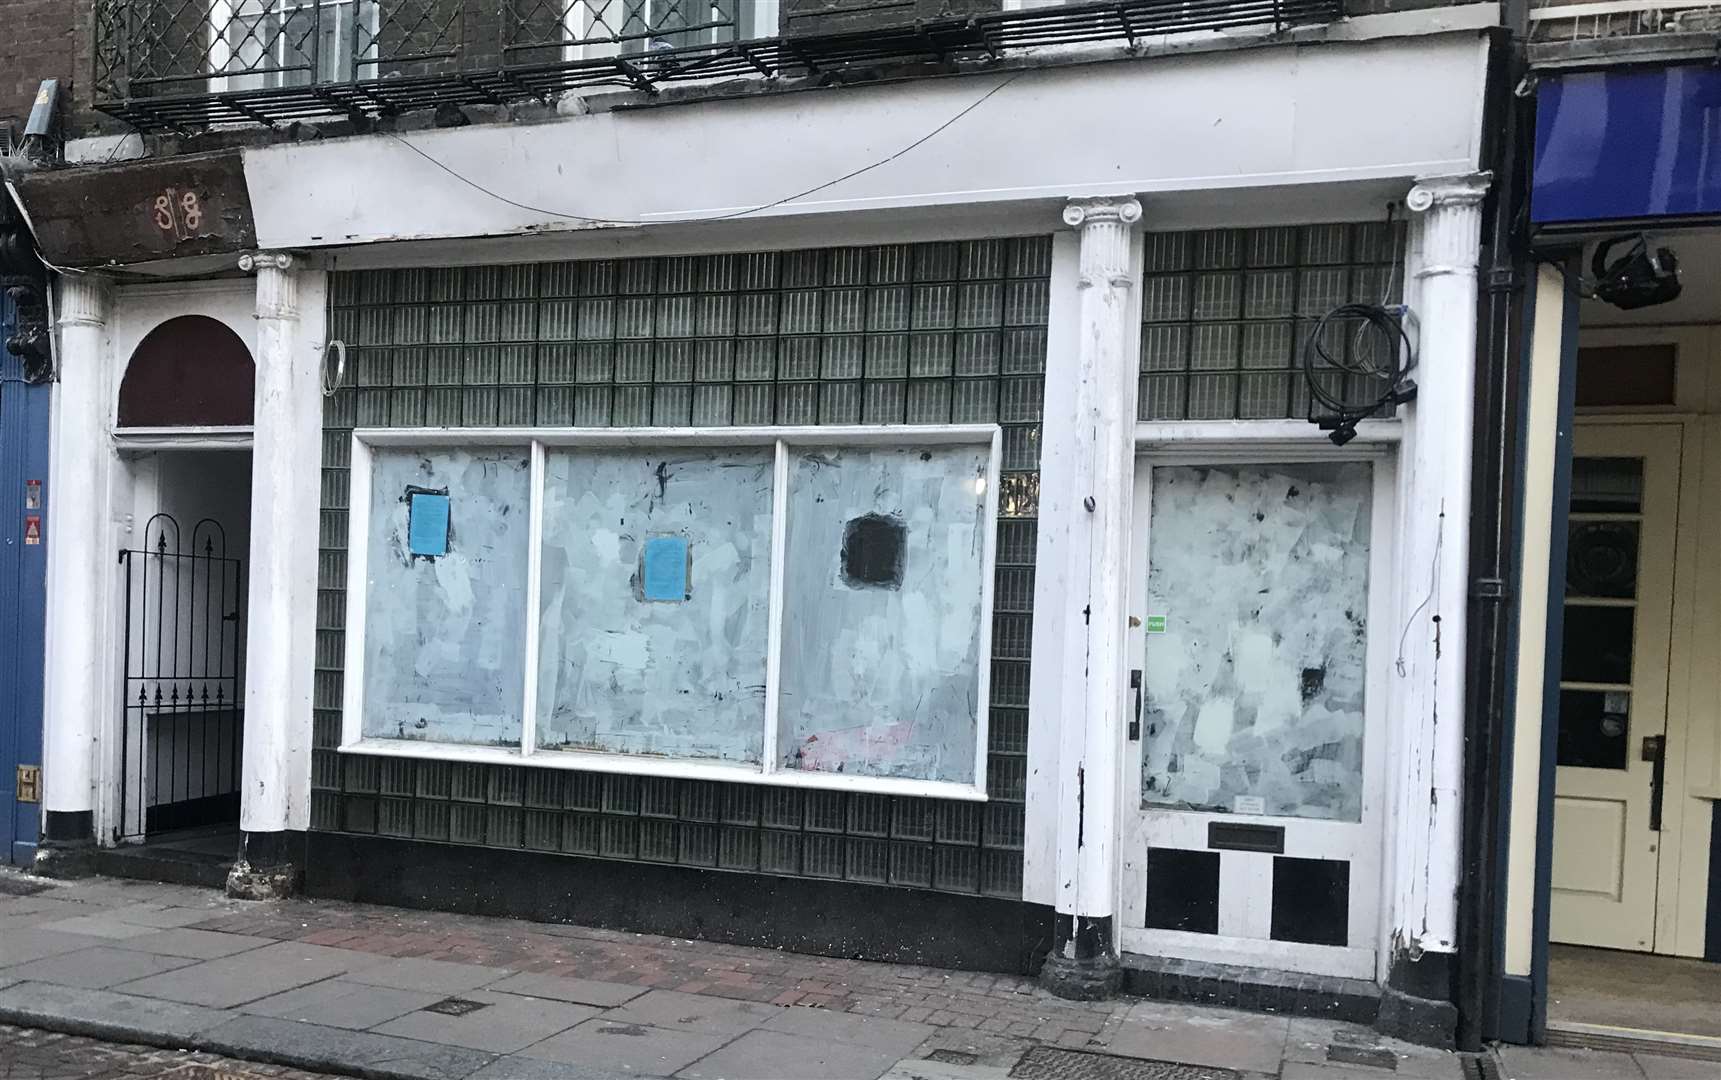 The former double glazing showroom could soon be a bar